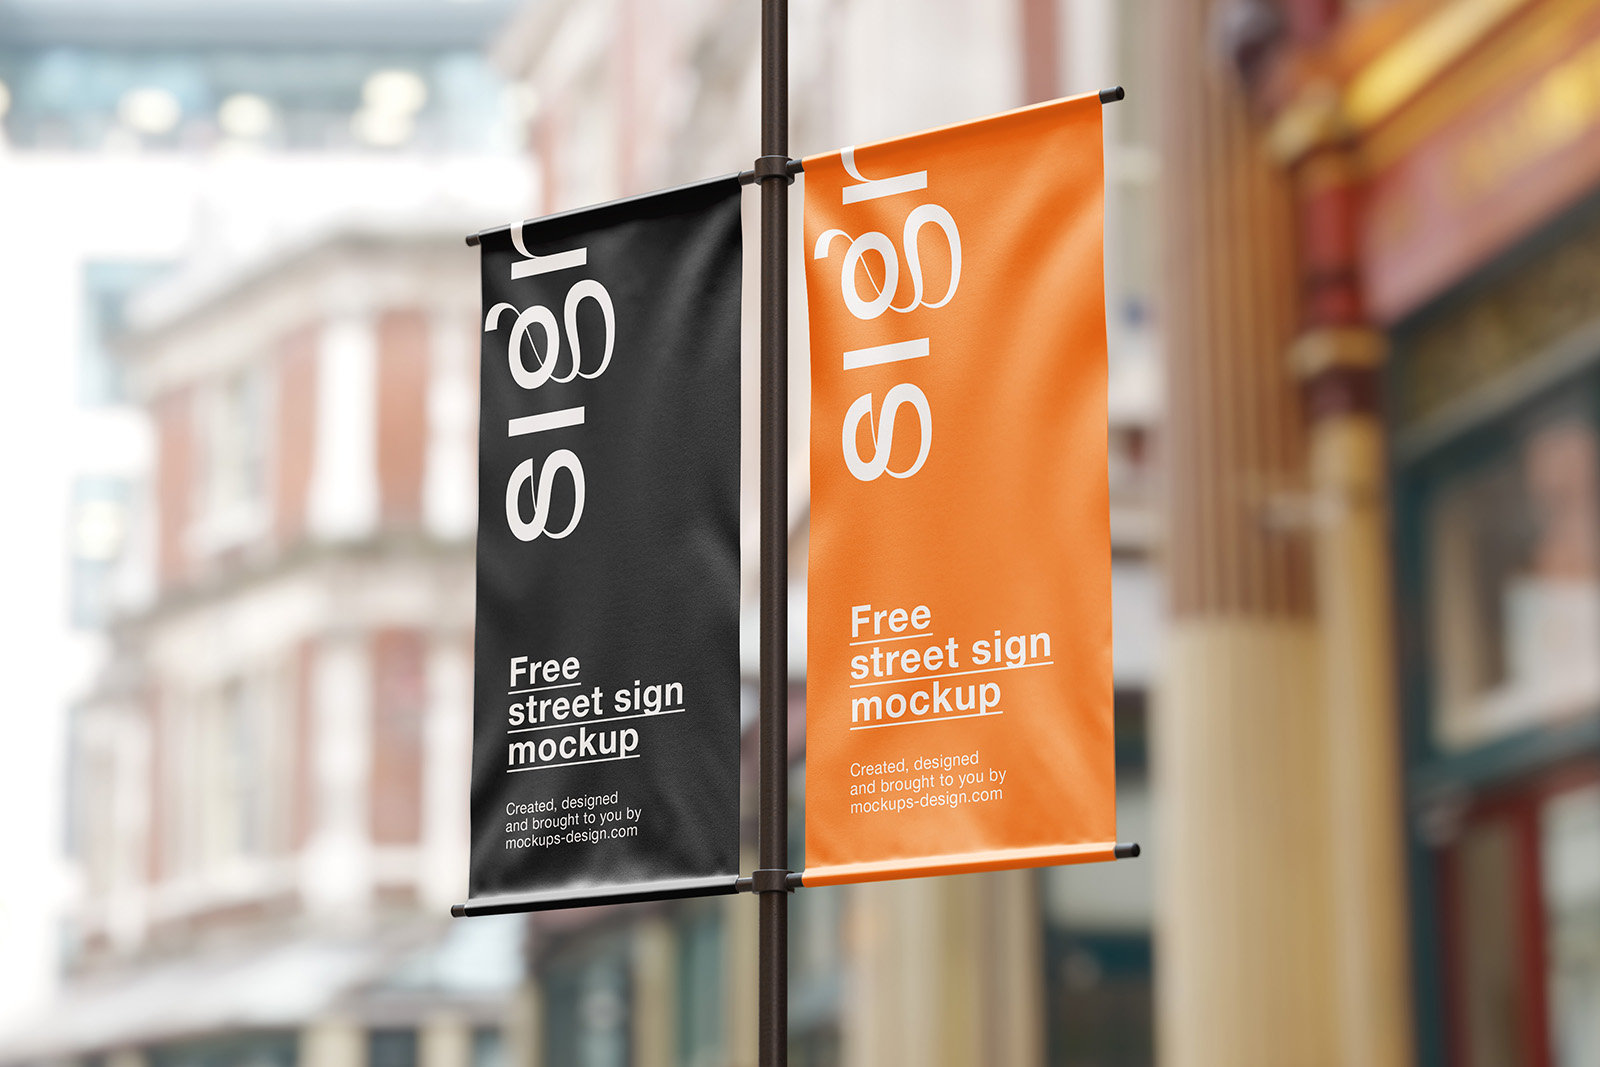 Perspective and Front Sights of 3 Street Banners Mockups FREE PSD